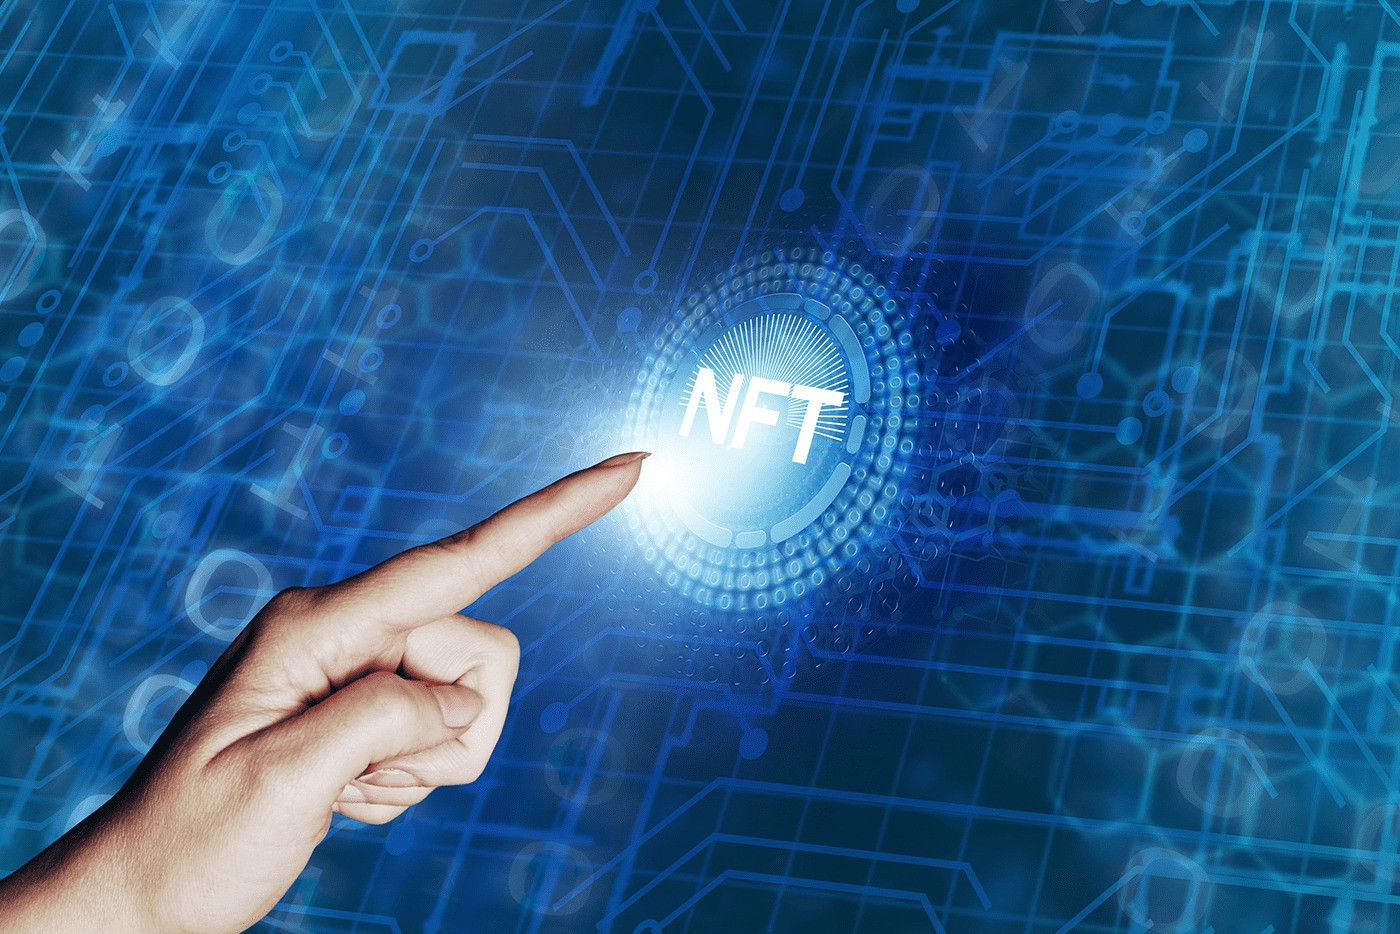 Blockchain In NFTs - Bridge the Gap Between NFTs and Traditional Gaming